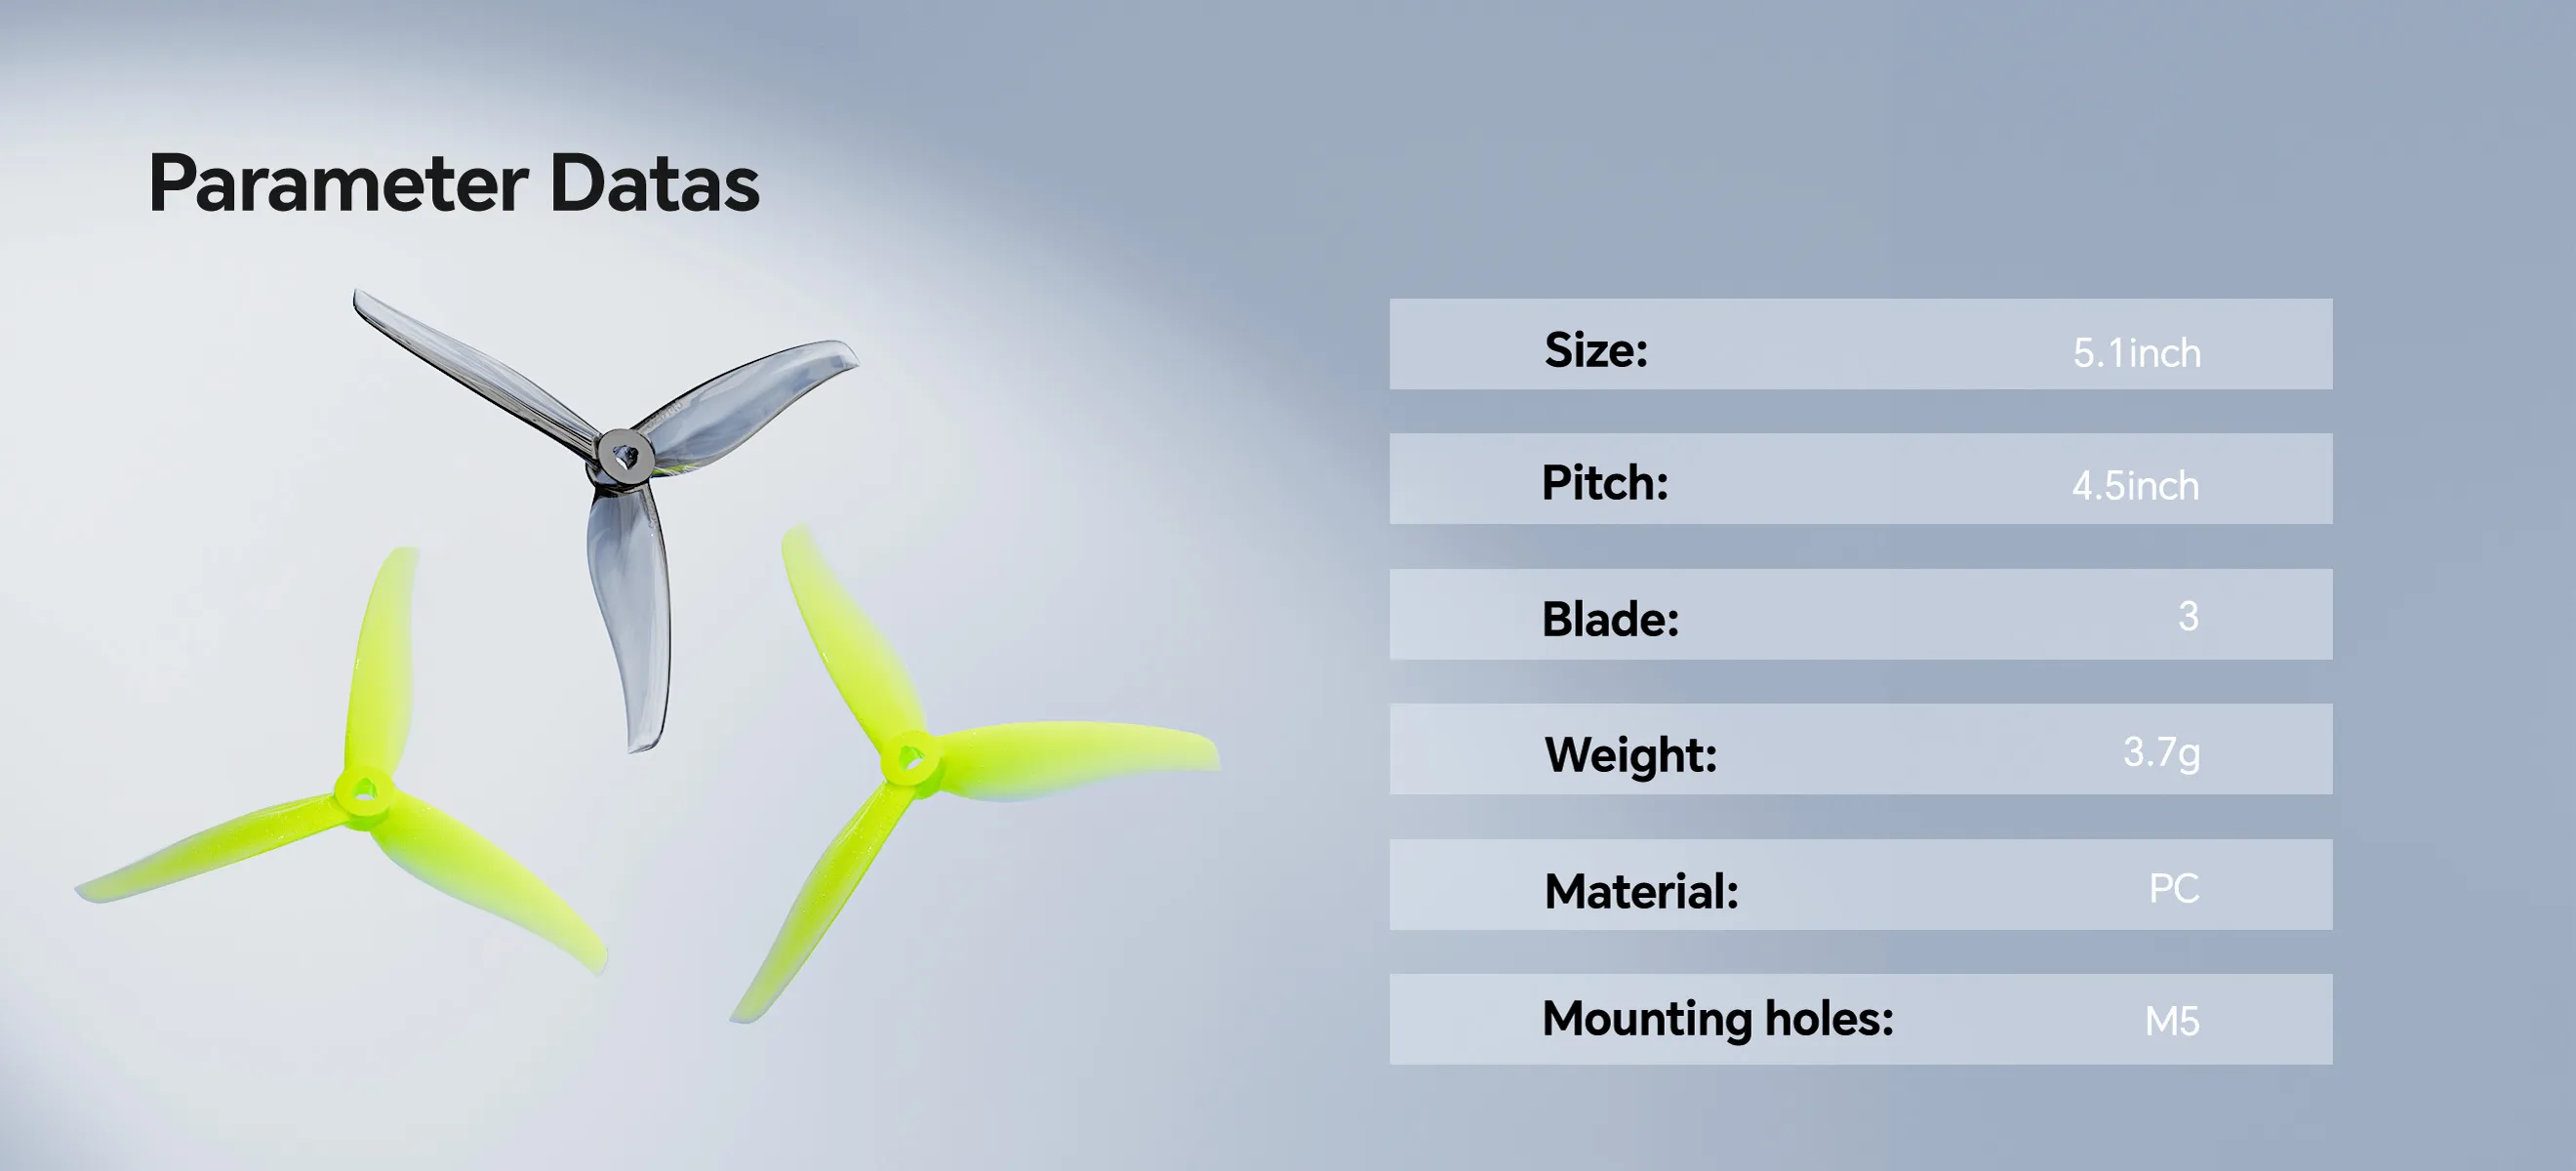 drone-propellers-sz5145-specification